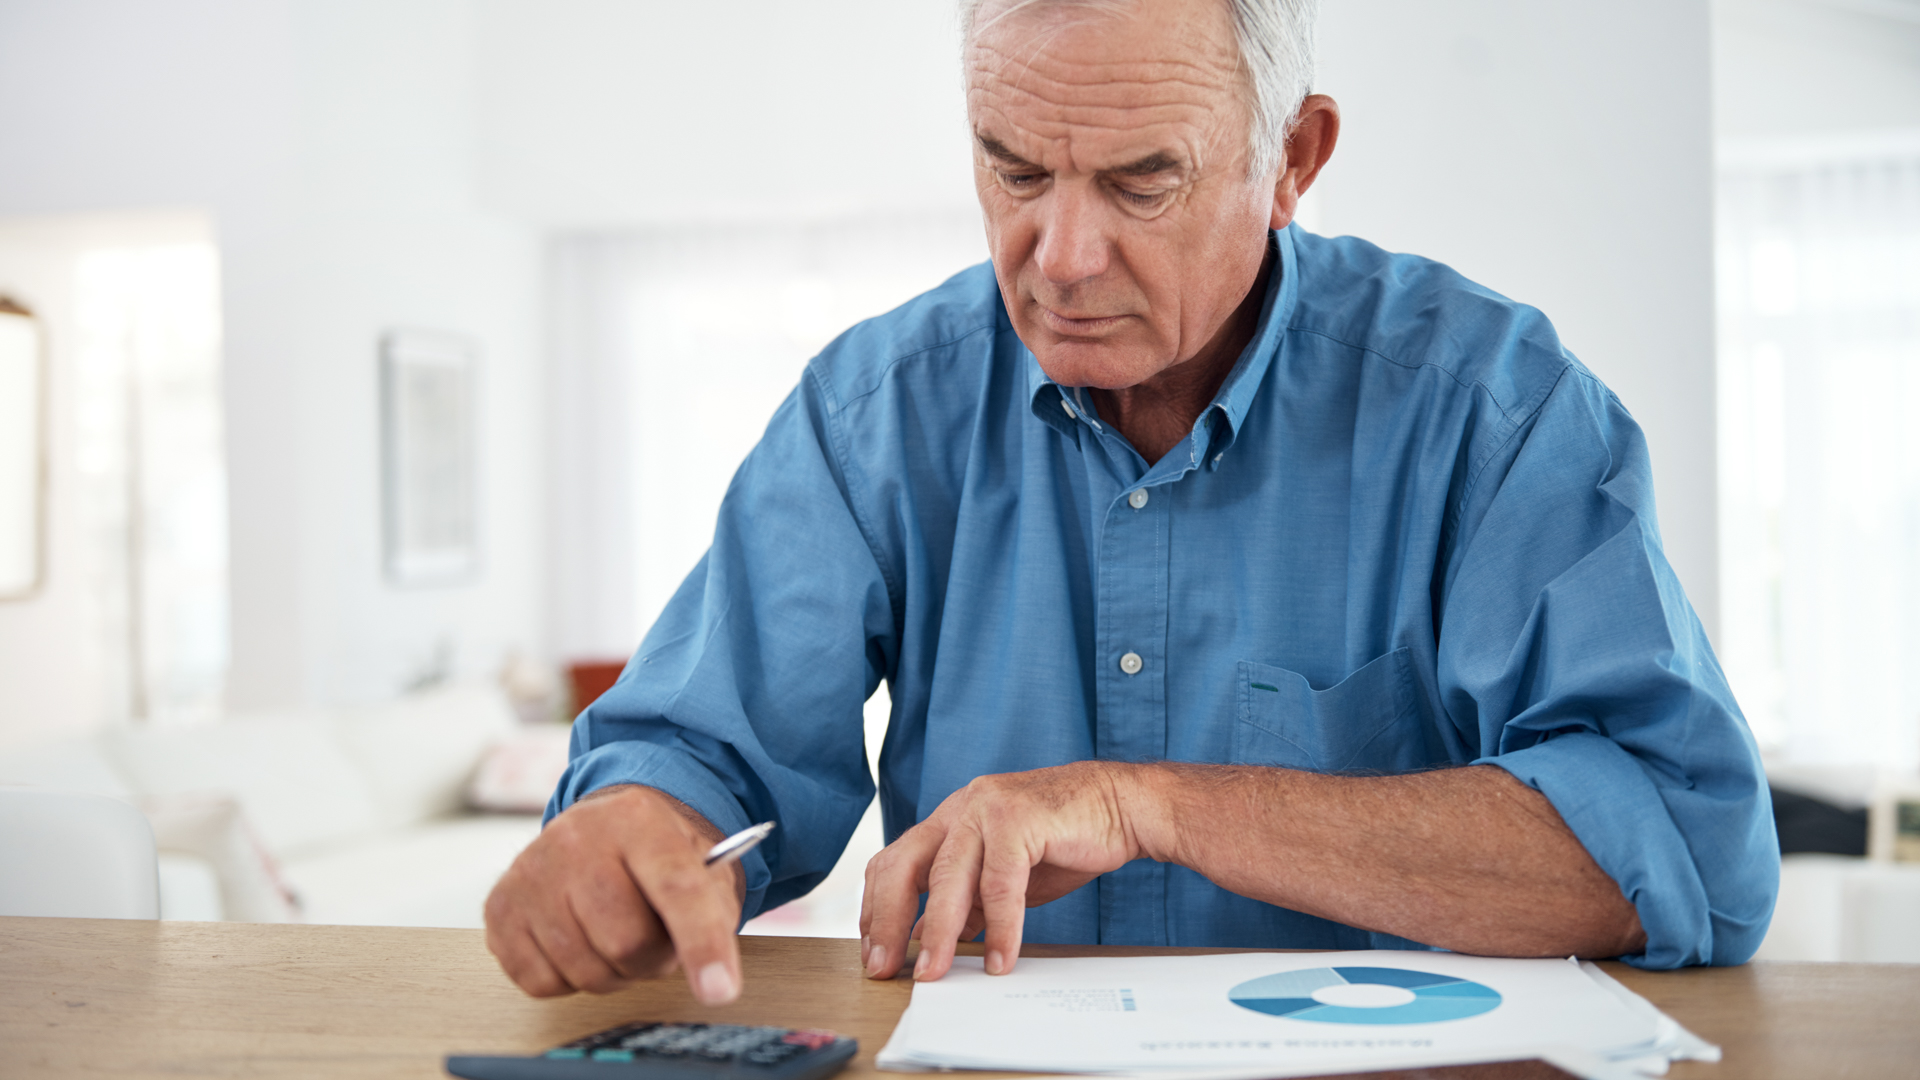 Is Maintaining Financial Life After Retirement A Challenge? Not at all